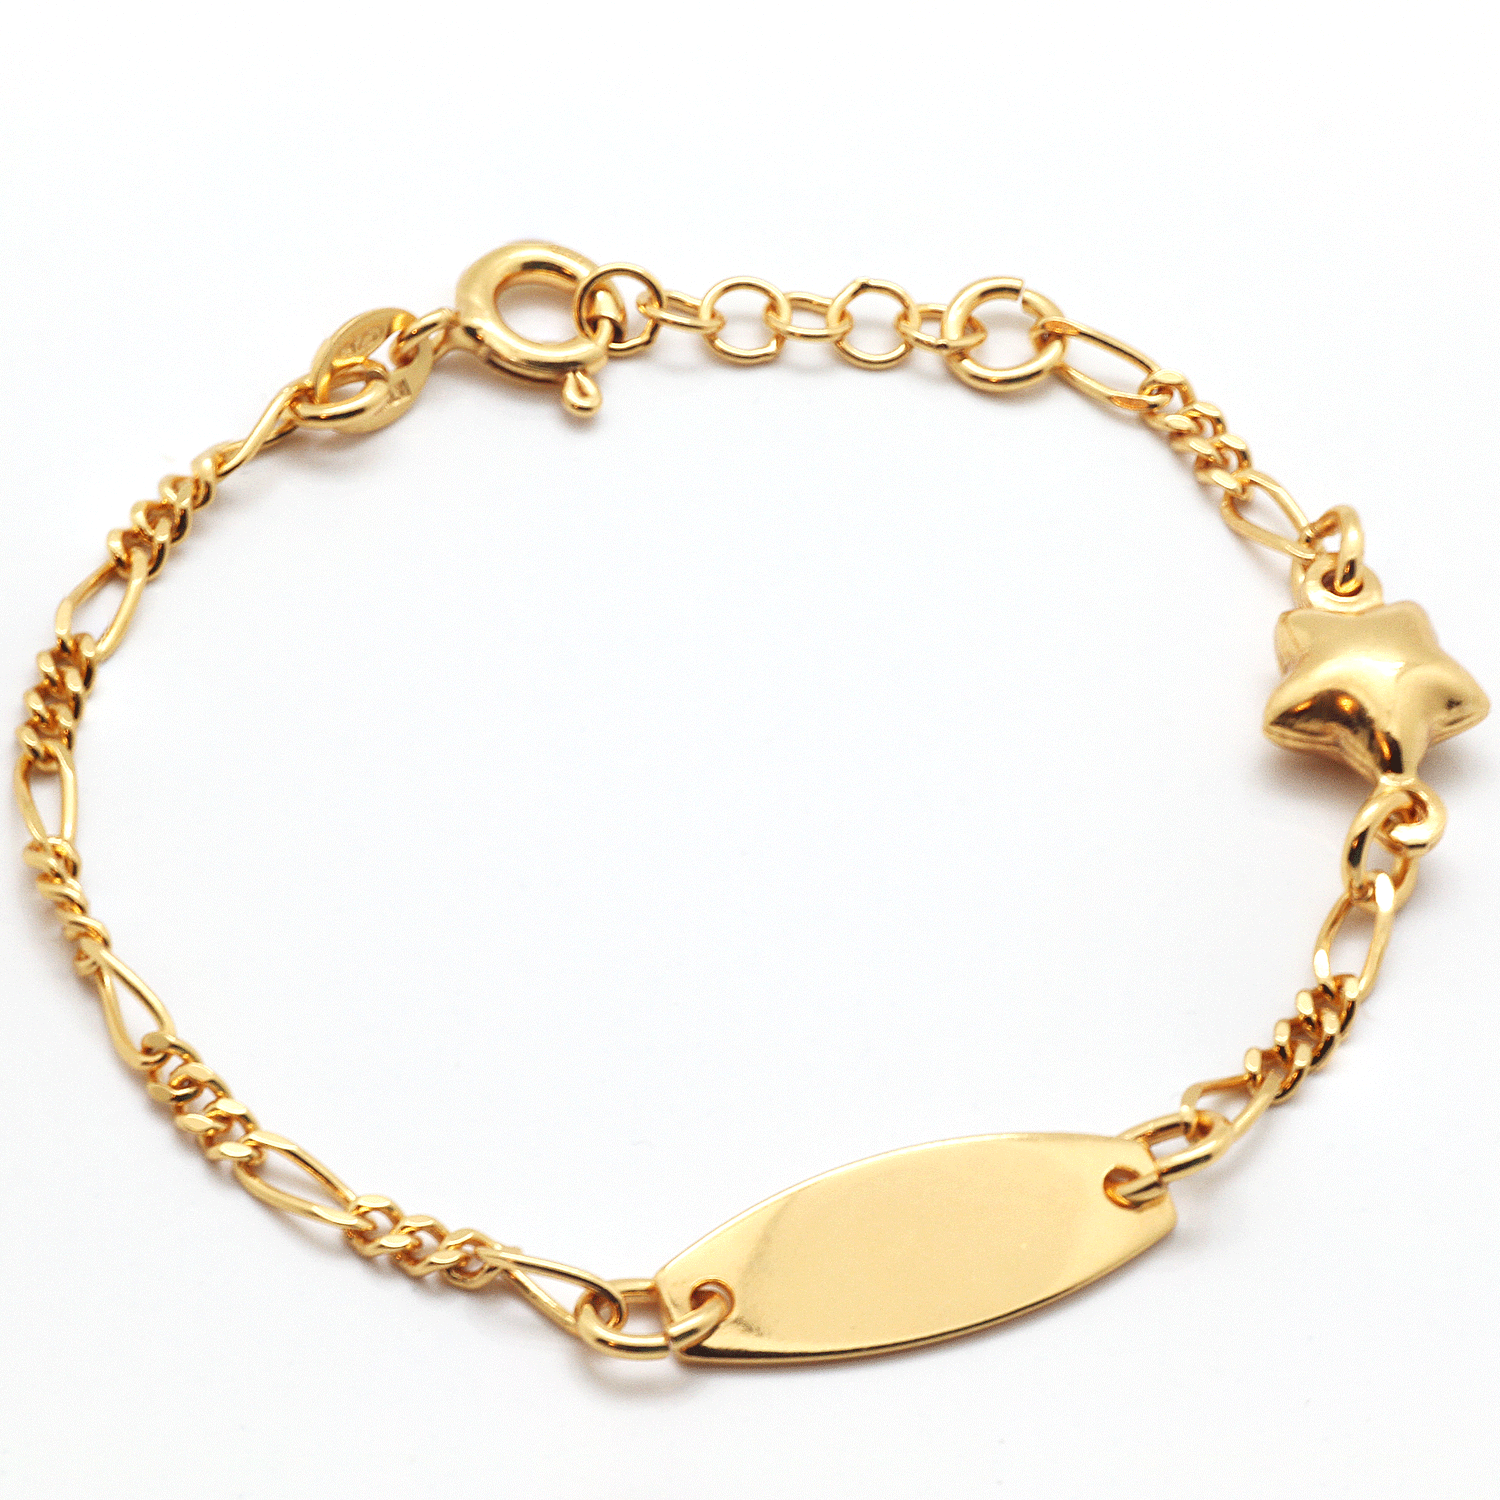 Sterling Silver Star and Tag Bracelet, Plated with 1 Micron 18 K Yellow  Gold, Made in Italy.